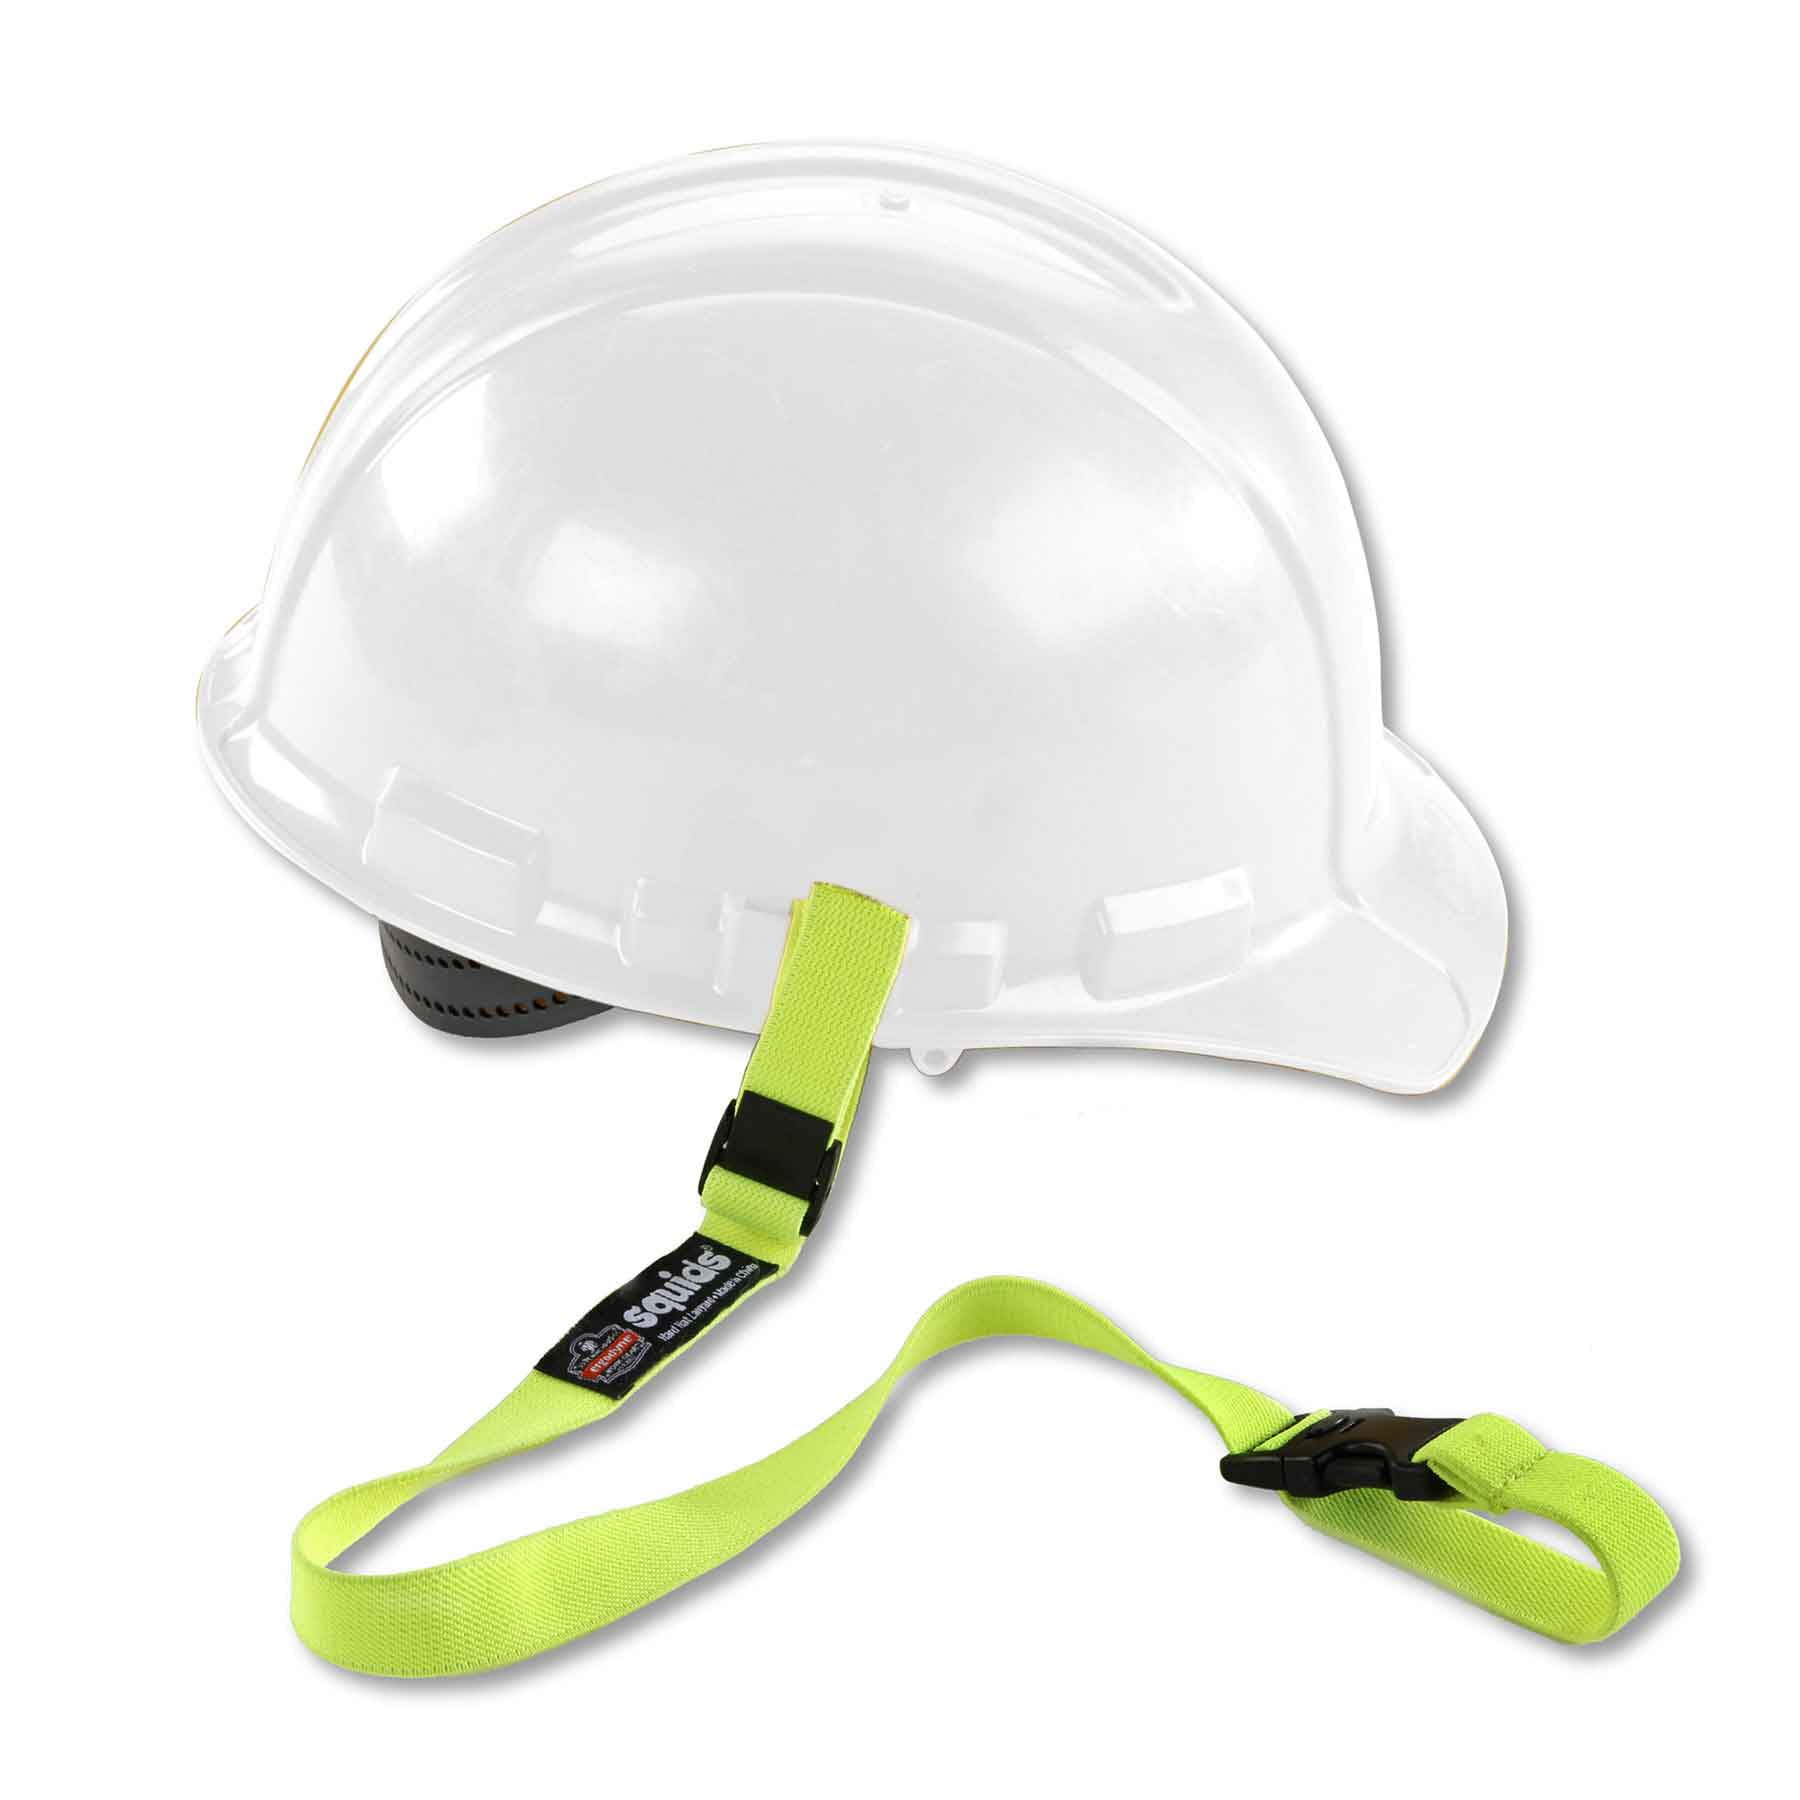 1 Erb Chin Strap Replacement 19182 Hardhat Hard Hat Cap Very for sale online